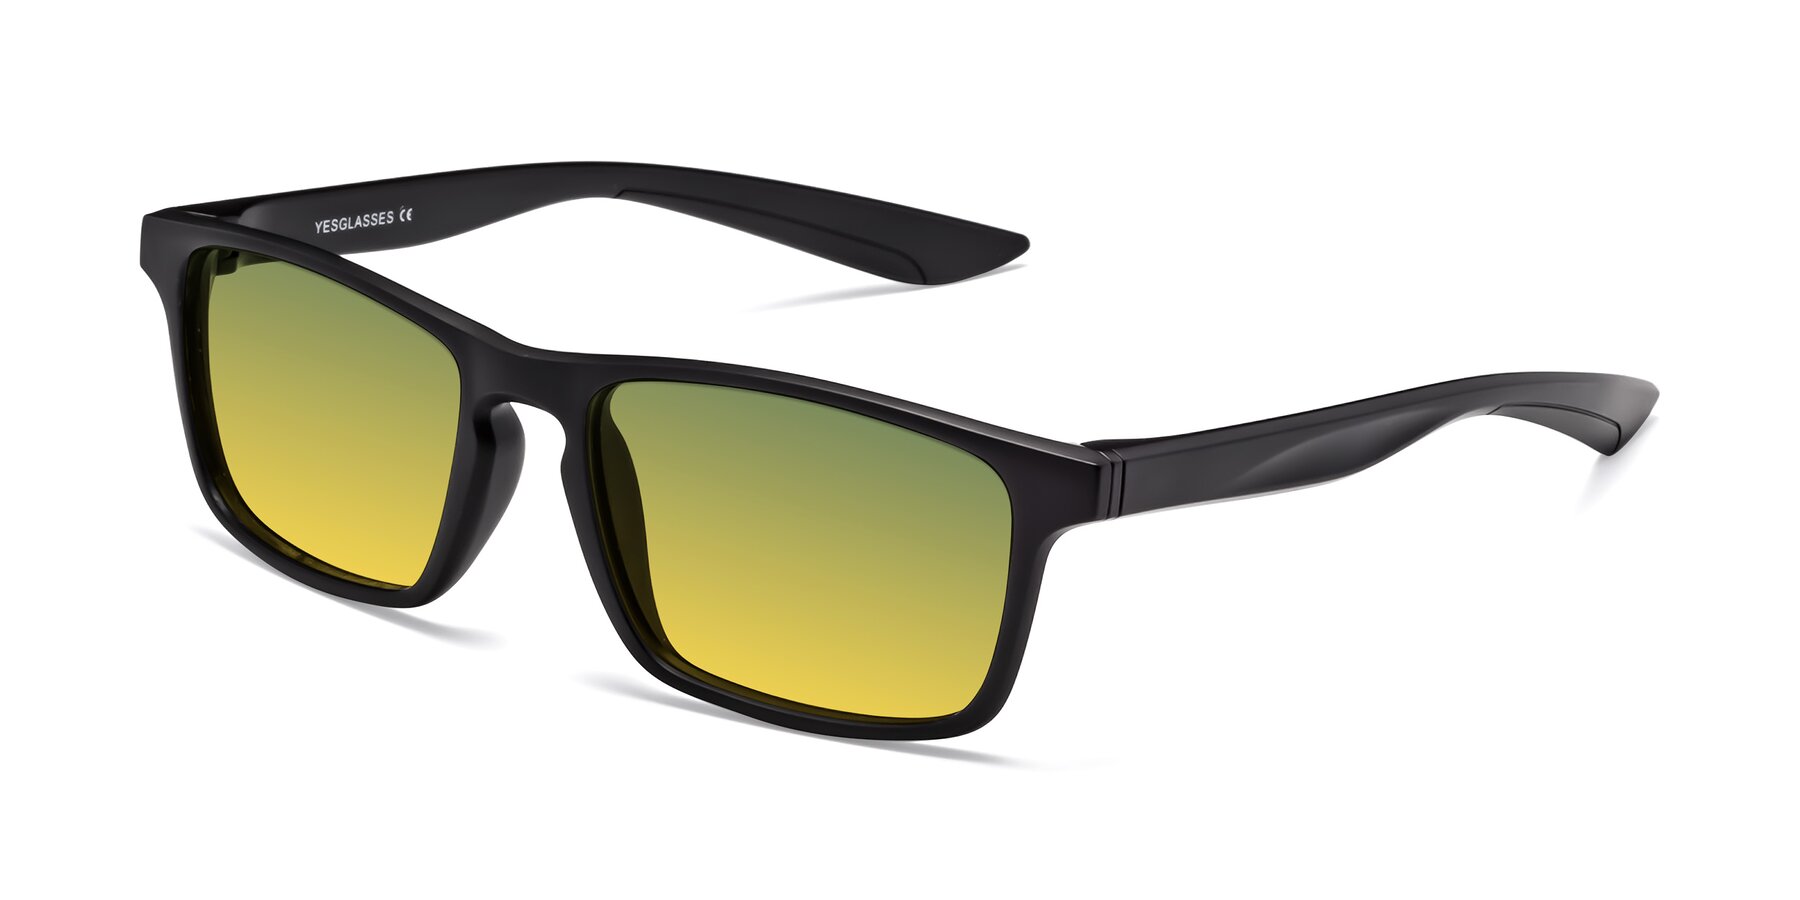 Angle of Passion in Matte Black with Green / Yellow Gradient Lenses